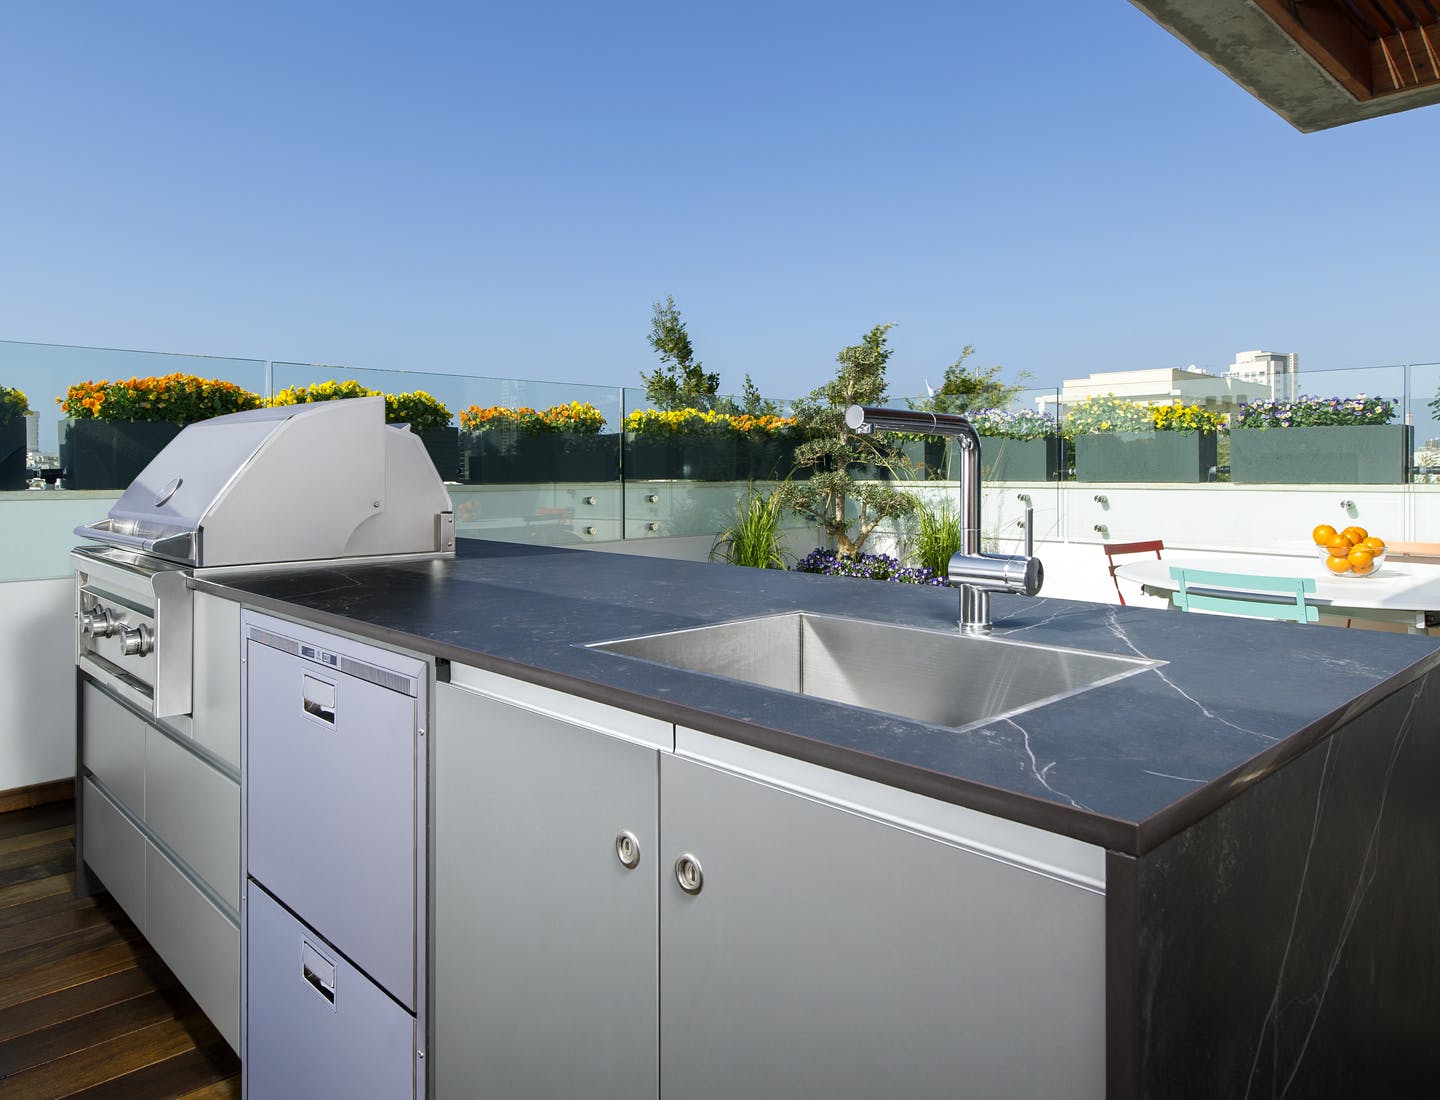 Image of cocina exterior 31 in Outside use kitchens - Cosentino